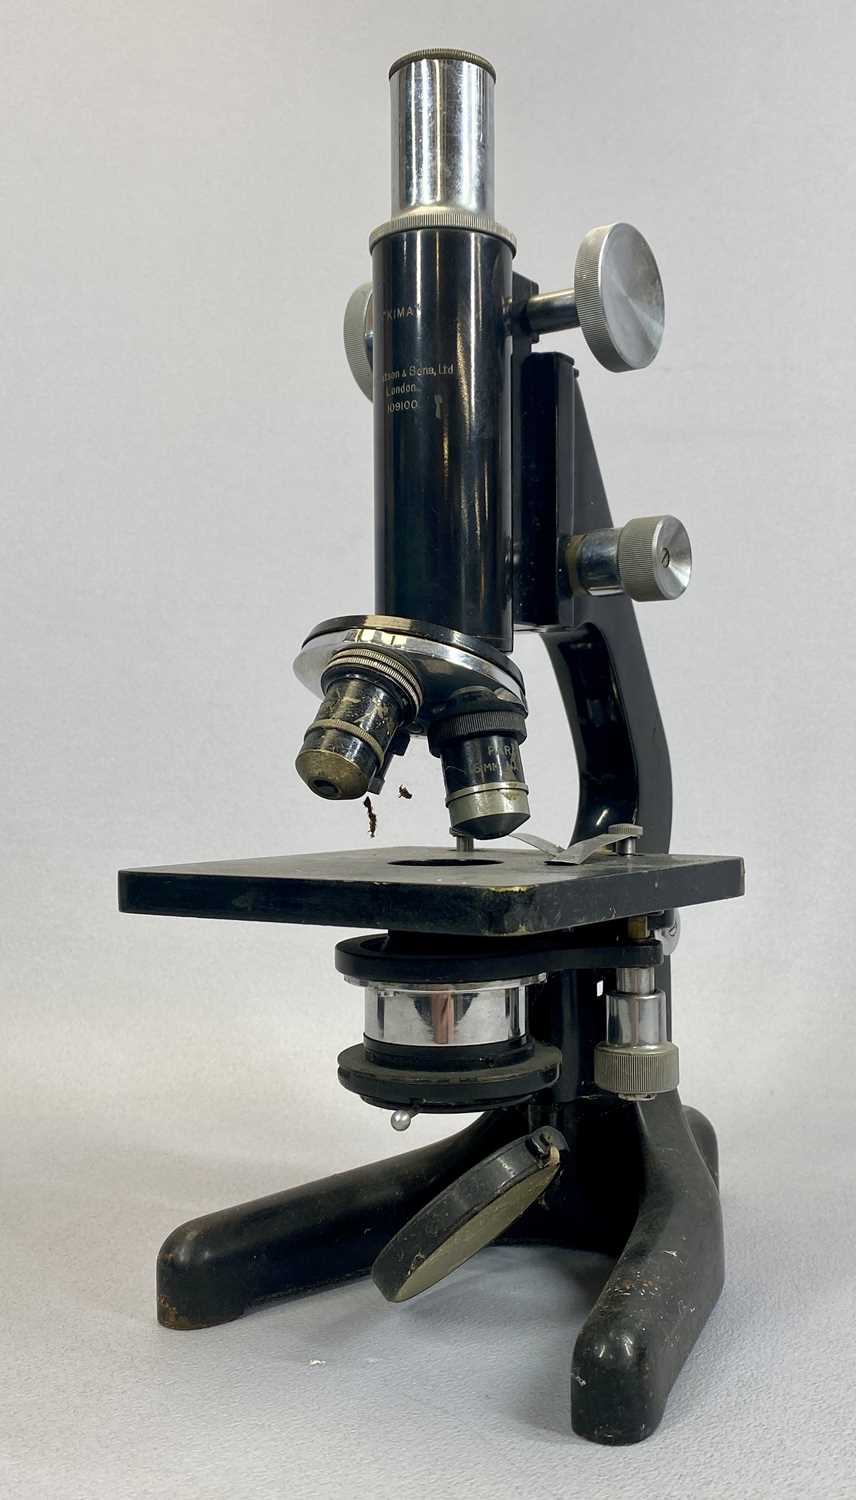 SCIENTIFIC INTSTRUMENTS / RELATED ITEMS comprising W Watson & Sons, London, 'Kima' microscope, No. - Image 3 of 7